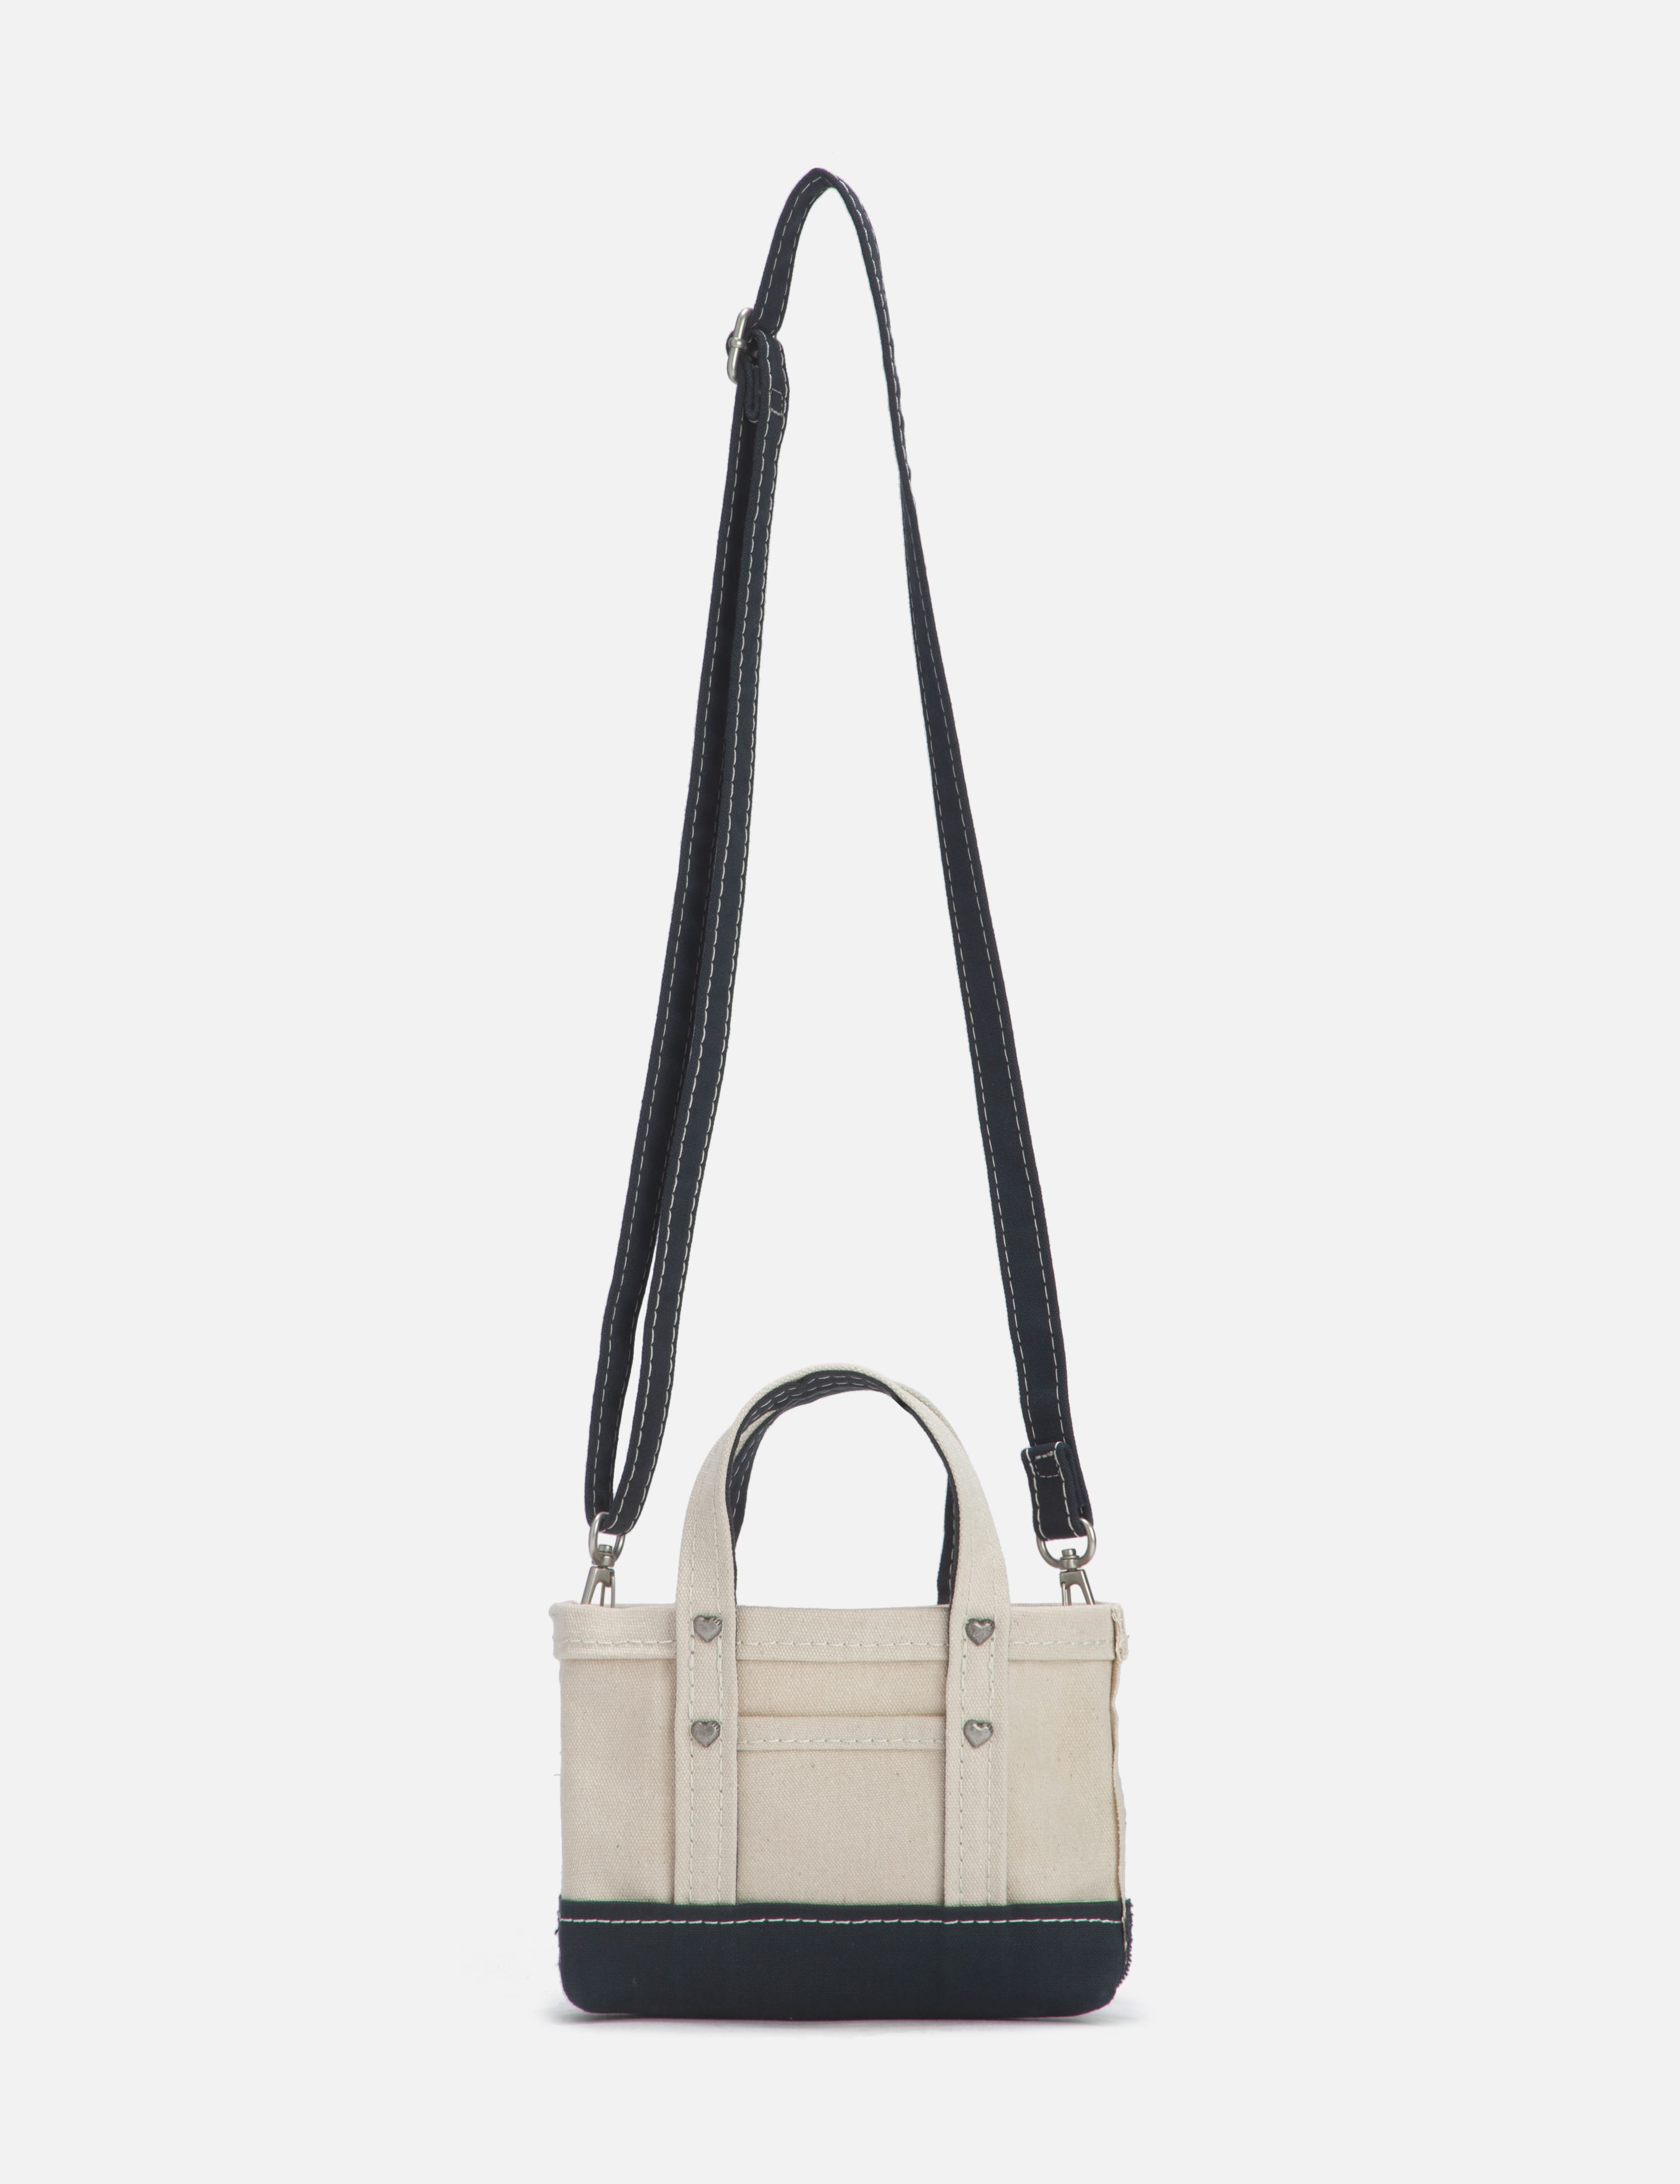 Human Made - HEAVY CANVAS MINI SHOULDER TOTE | HBX - Globally 